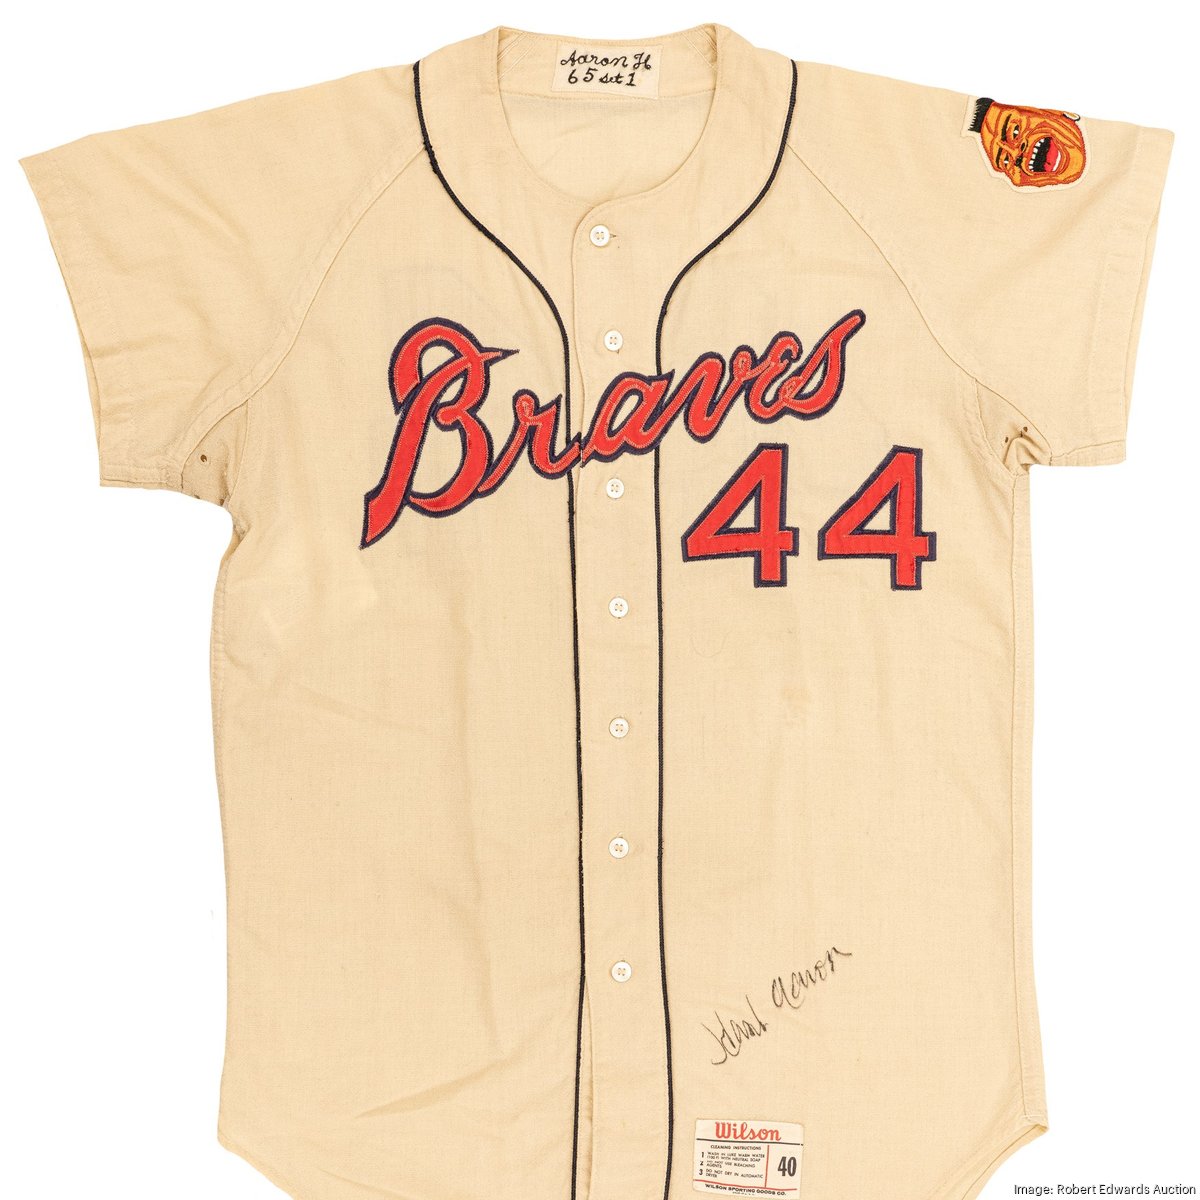 Hank Aaron Braves jersey fetches over $100,000 at auction